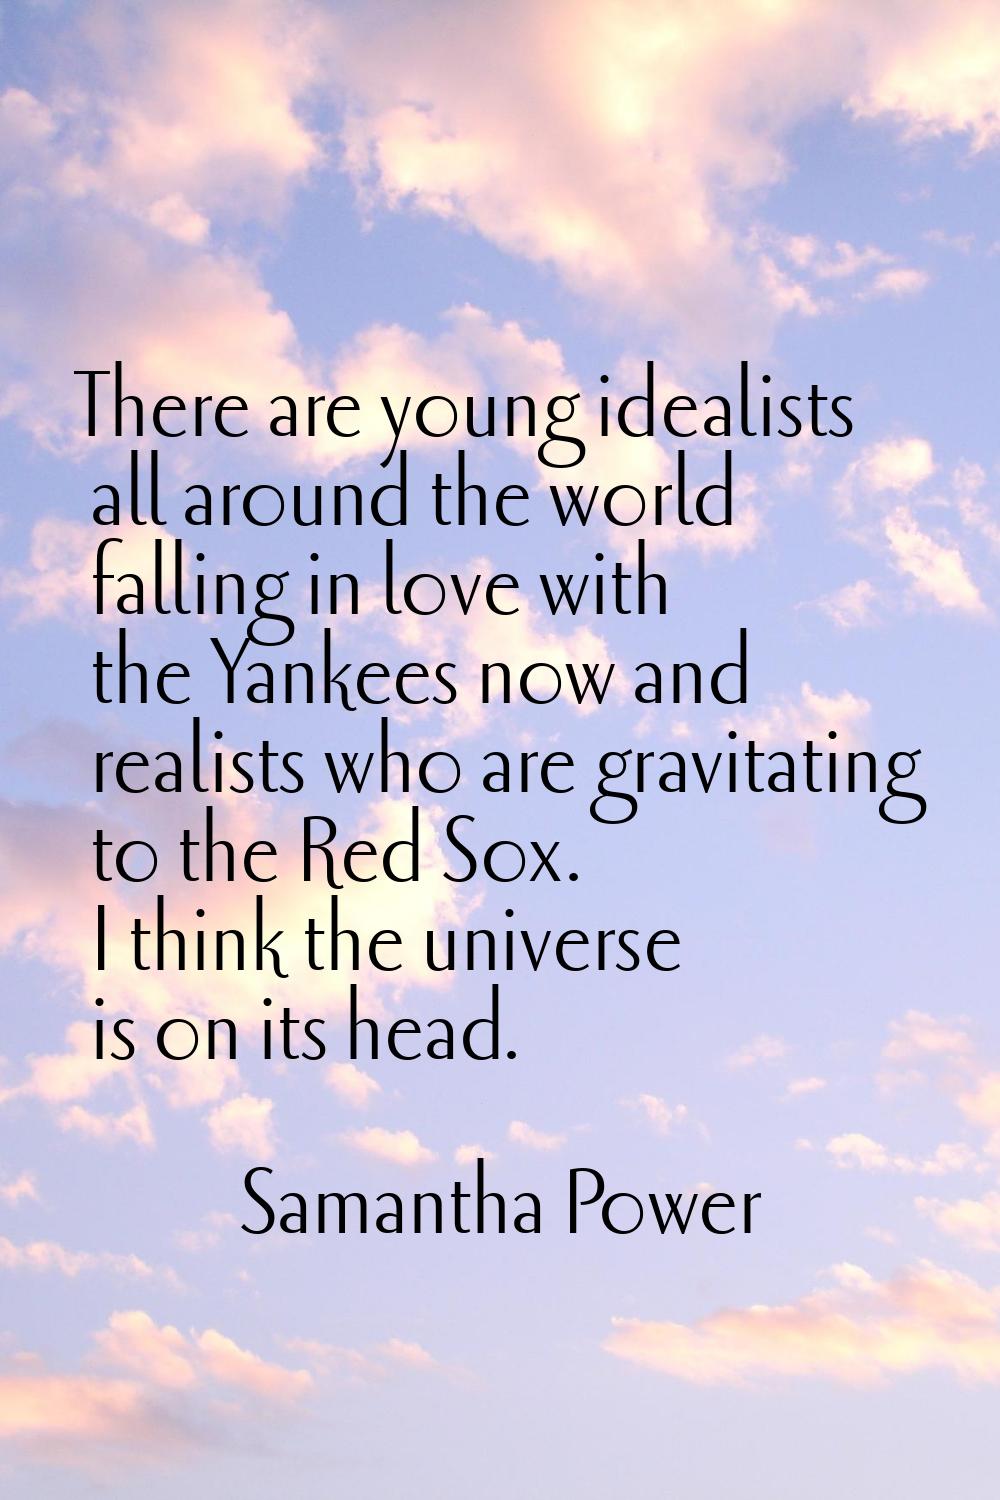 There are young idealists all around the world falling in love with the Yankees now and realists wh